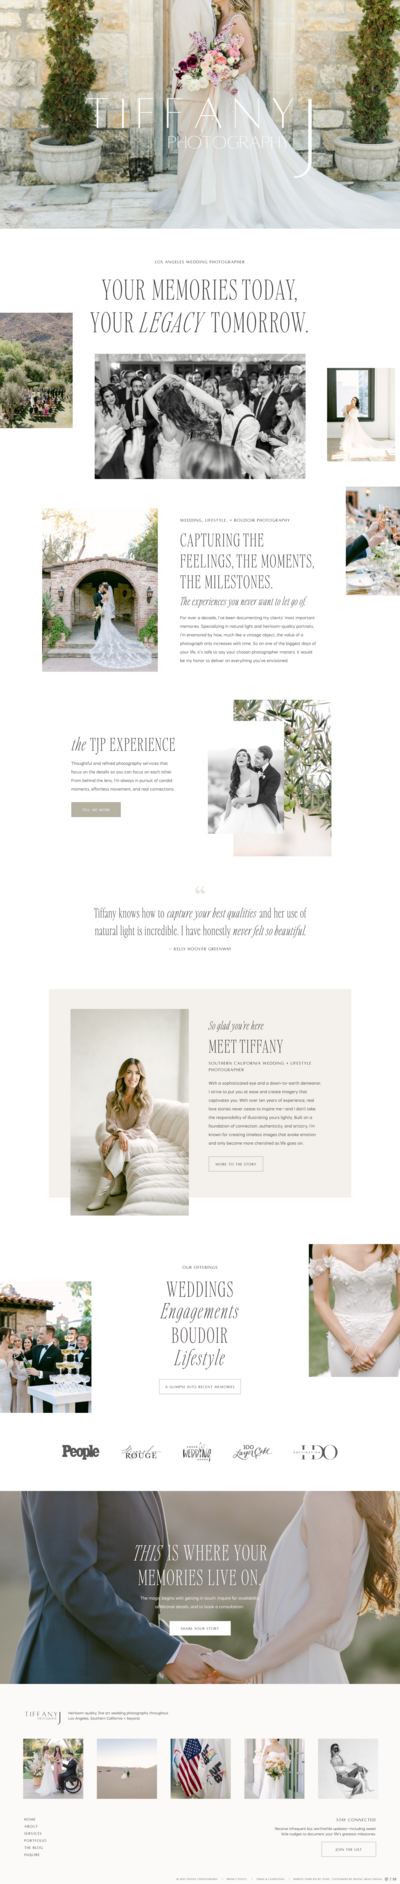 Showit Template Customization for Tiffany J Photography, a Los Angeles wedding photographer